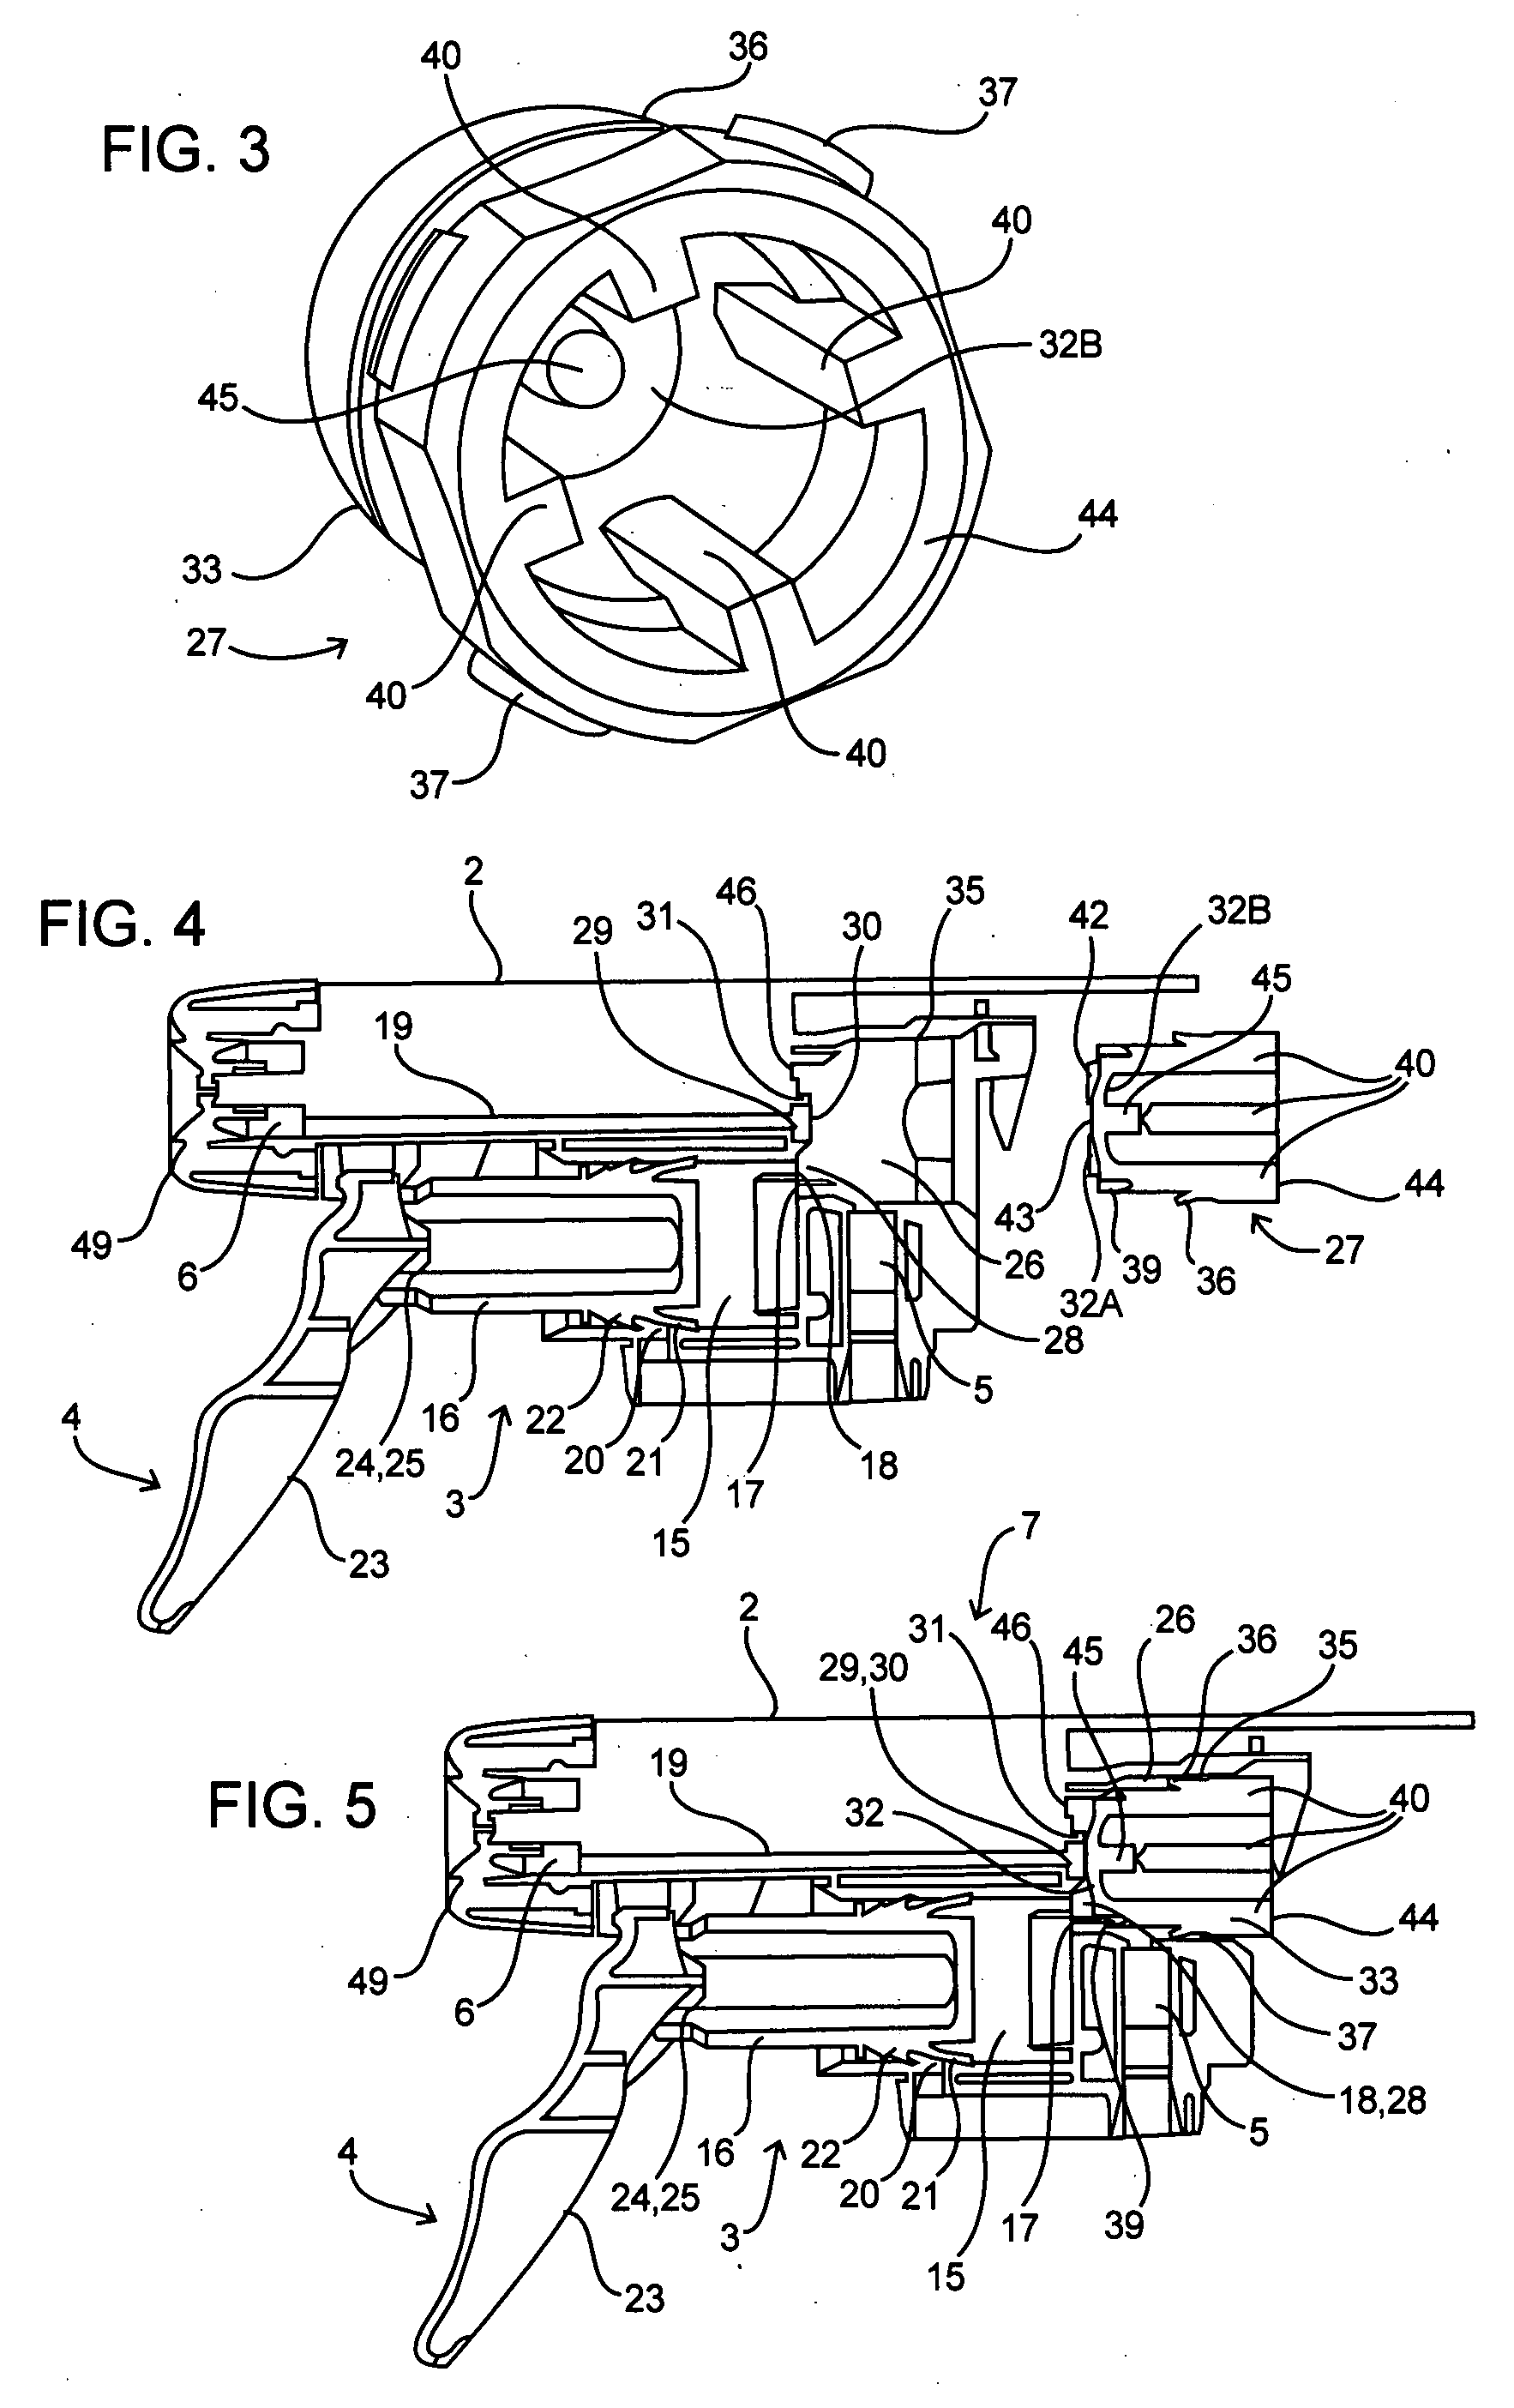 Precompression system for a liquid dispensing device and method of assembling such precompressed system